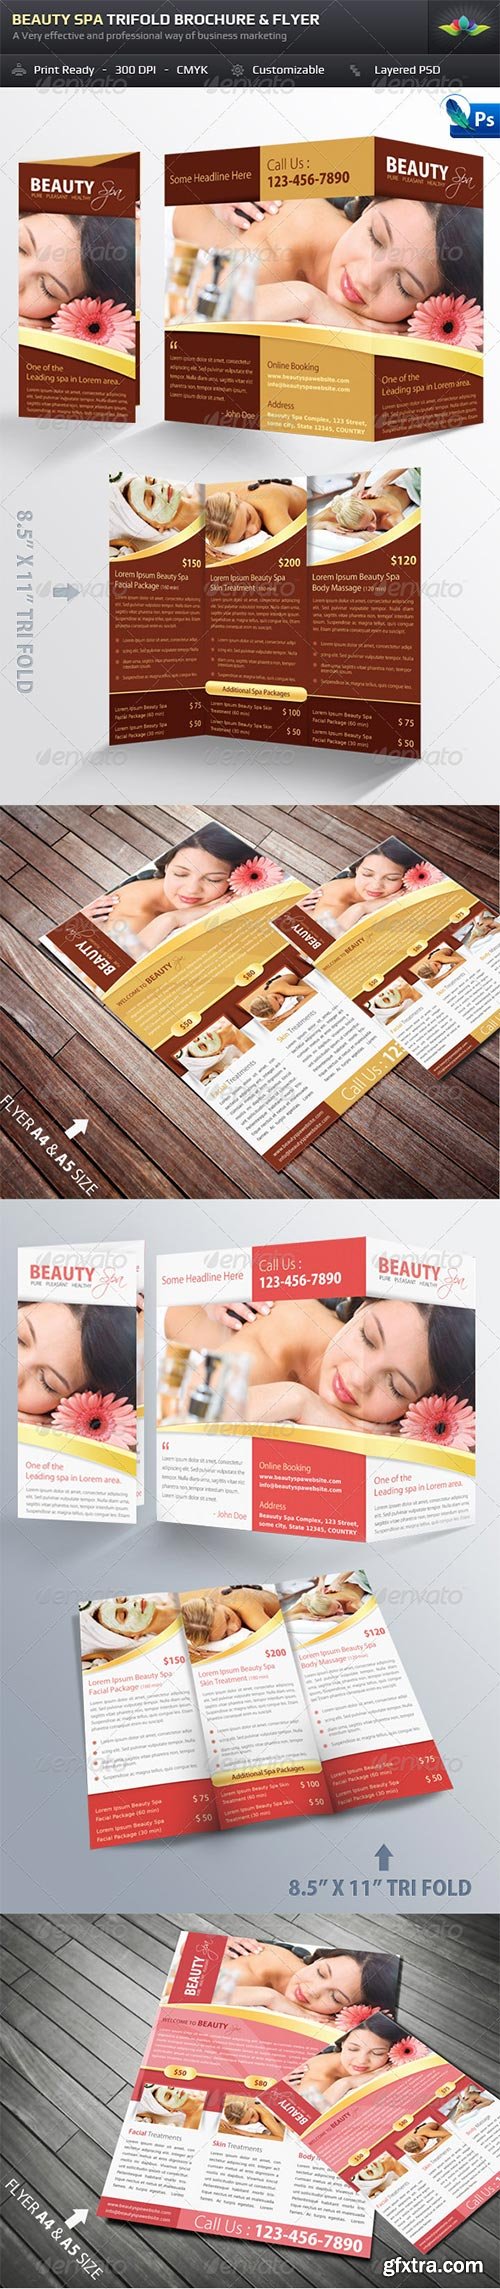 GraphicRiver - Beauty Spa Trifold Brochure & Flyer Pack